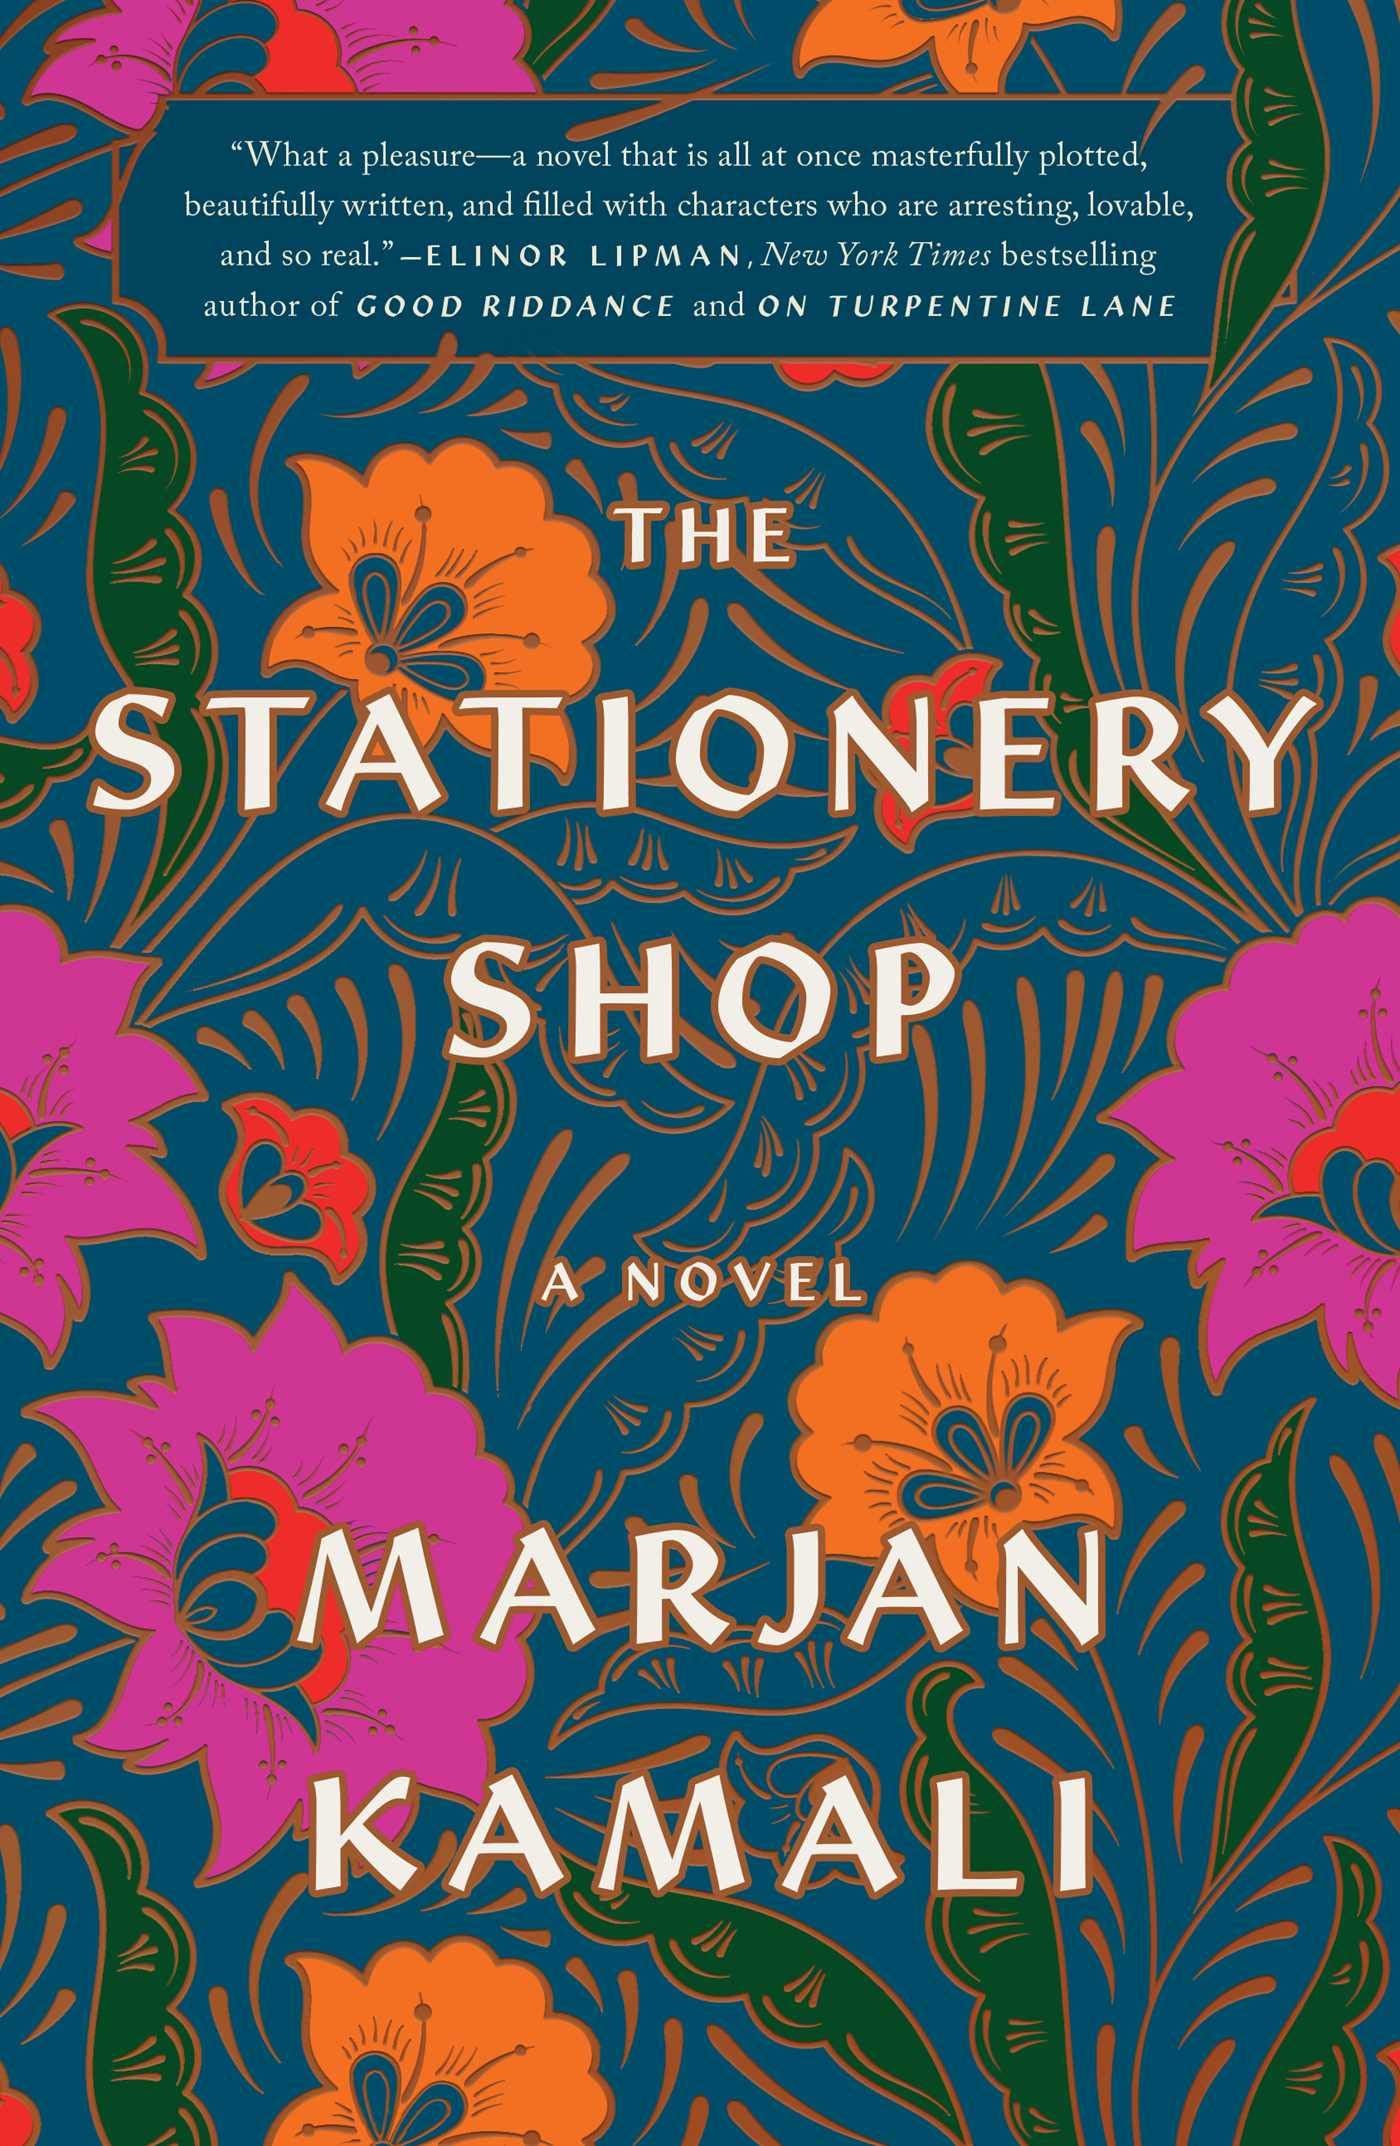 The cover of The Stationery Shop. Stylized in a way reminiscent of stationery, orange and pink flowers are depicted over a teal backdrop.